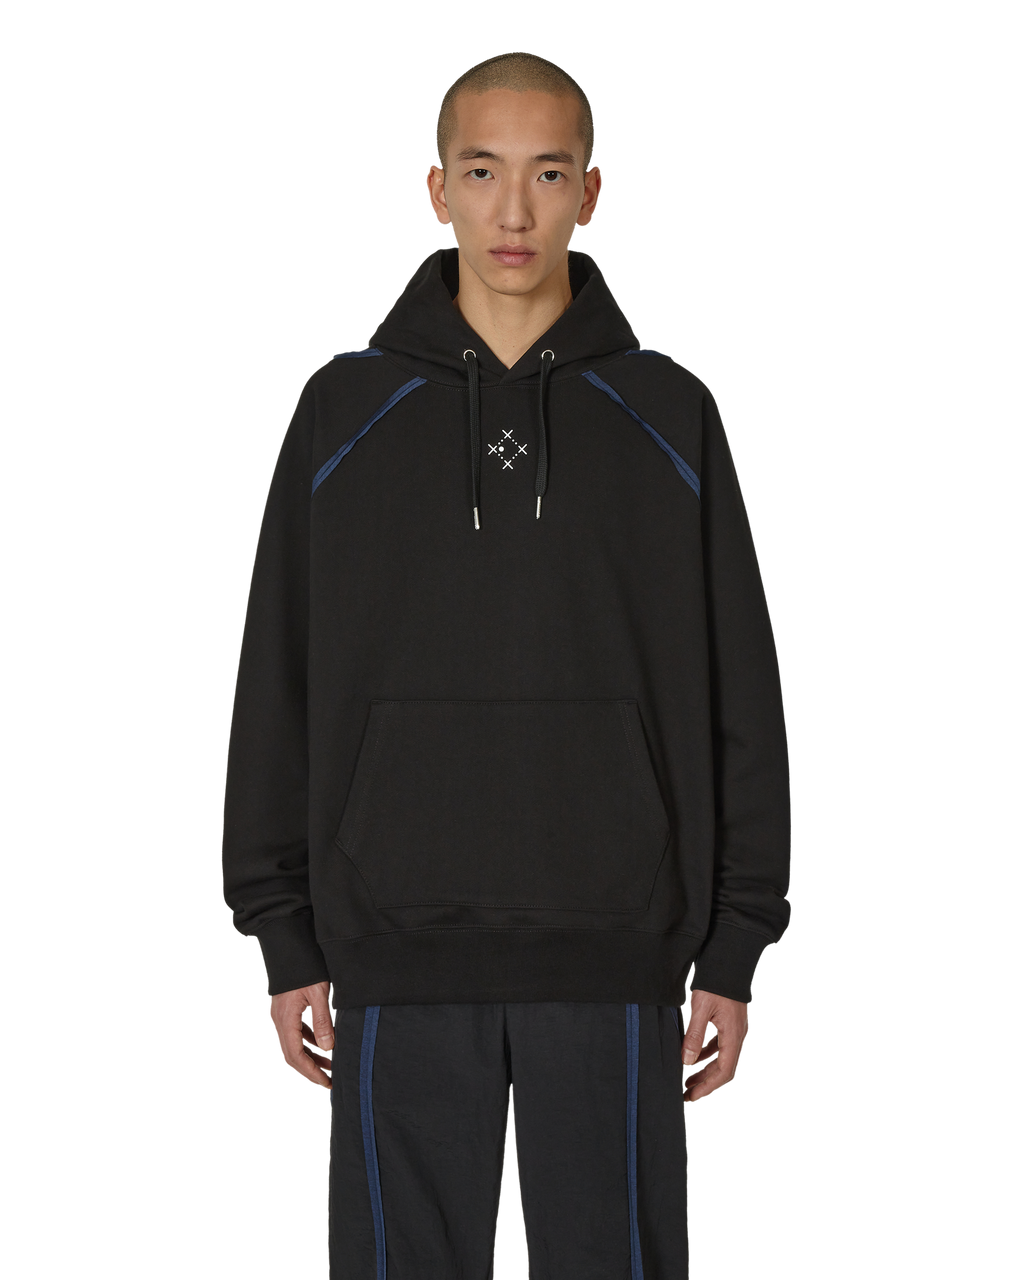 _J.L - A.L_ _J.L-A.L_ x Sound Sports Hoodie J297460-L-Black front